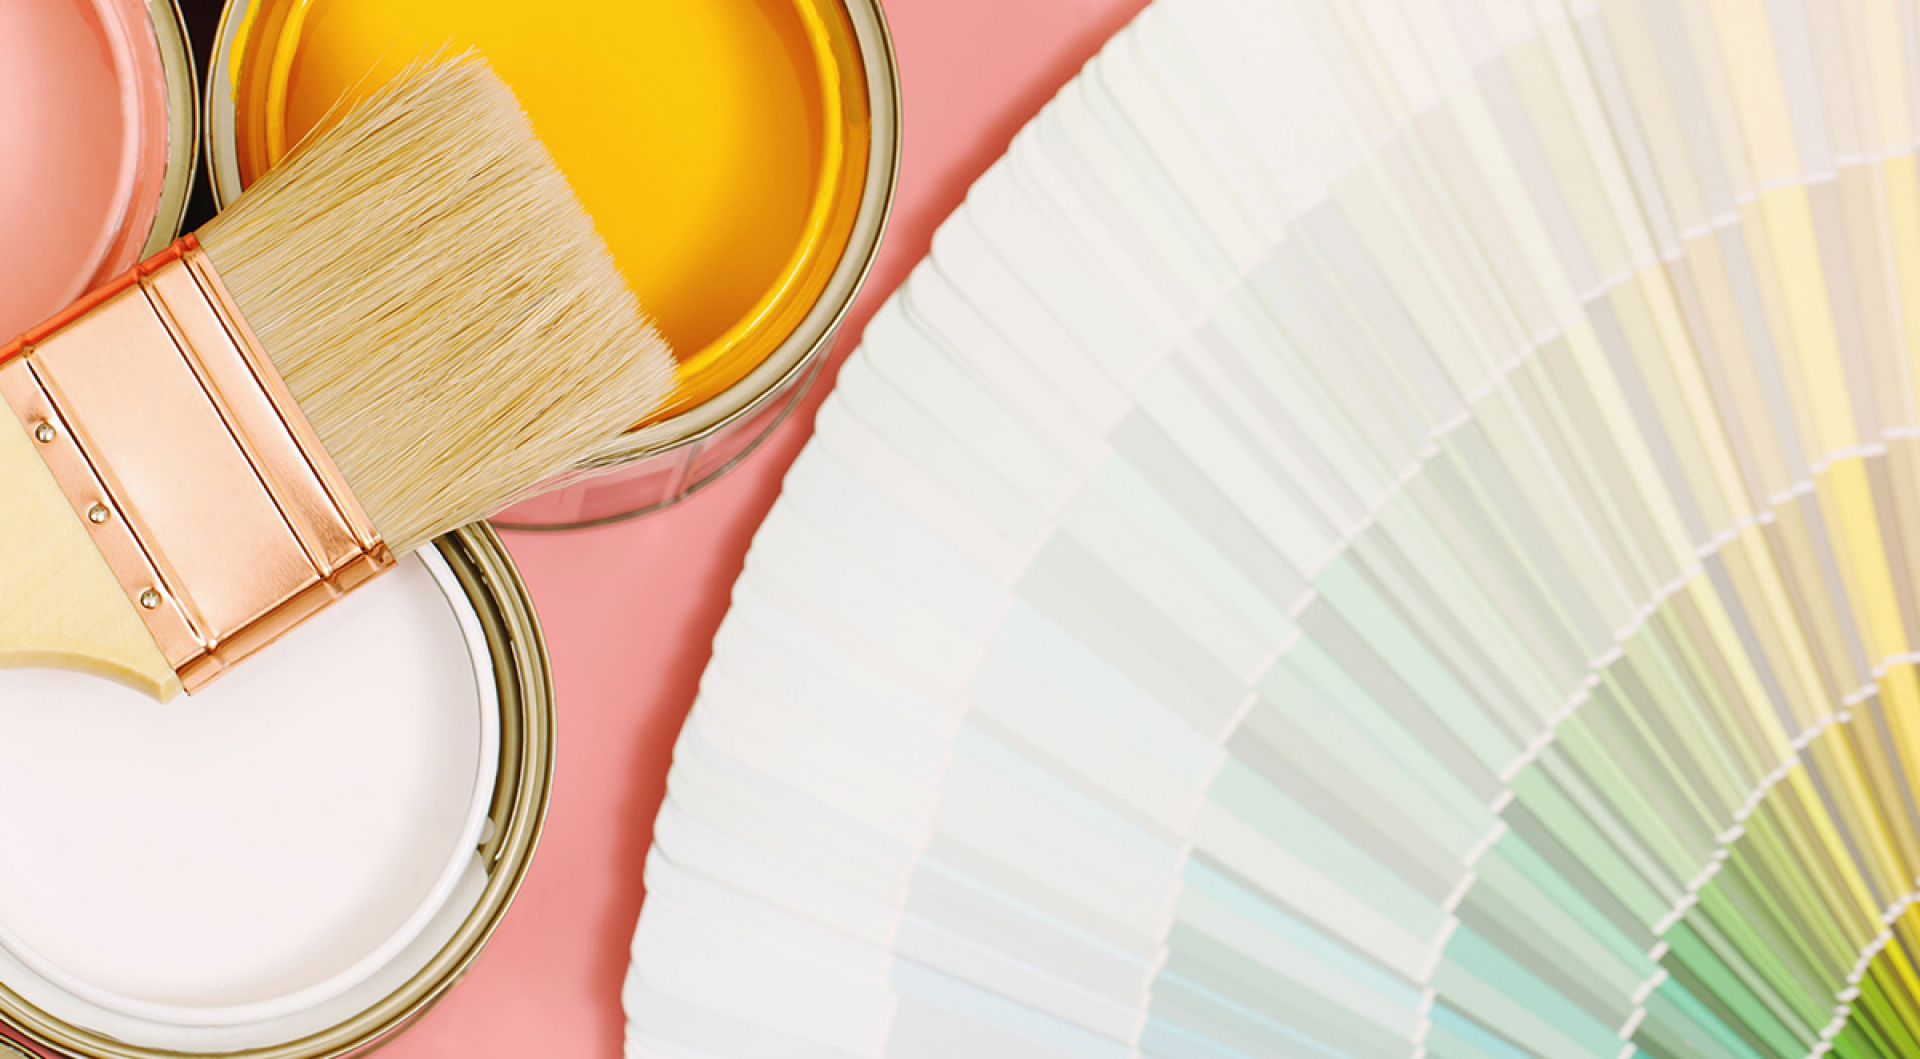 How to Prepare Your House for Painting